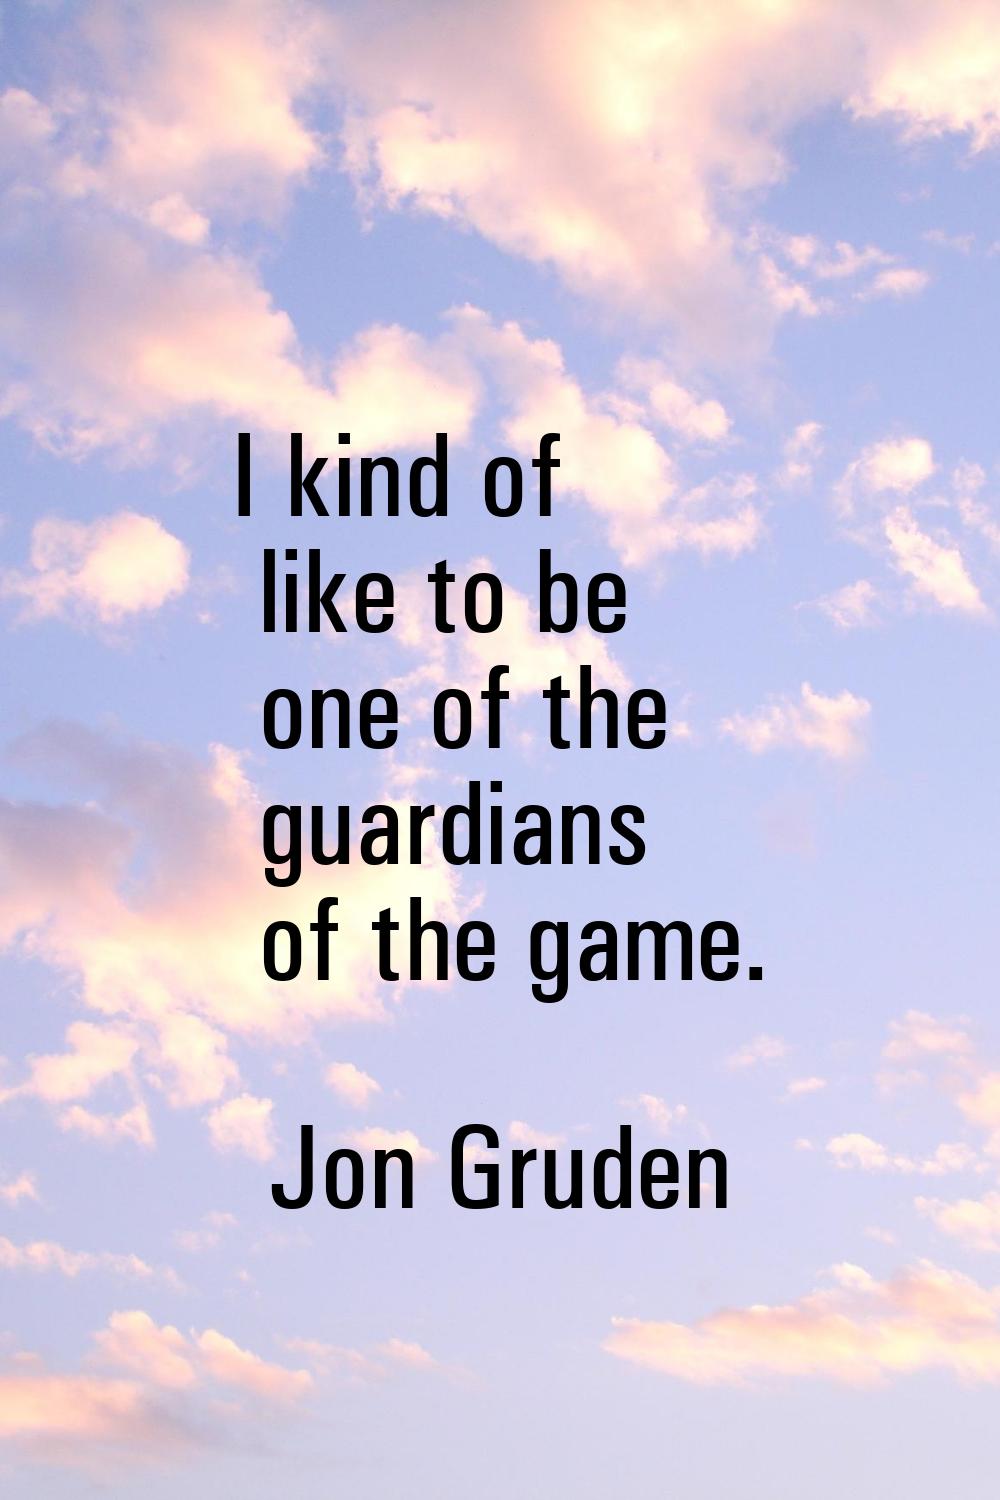 I kind of like to be one of the guardians of the game.